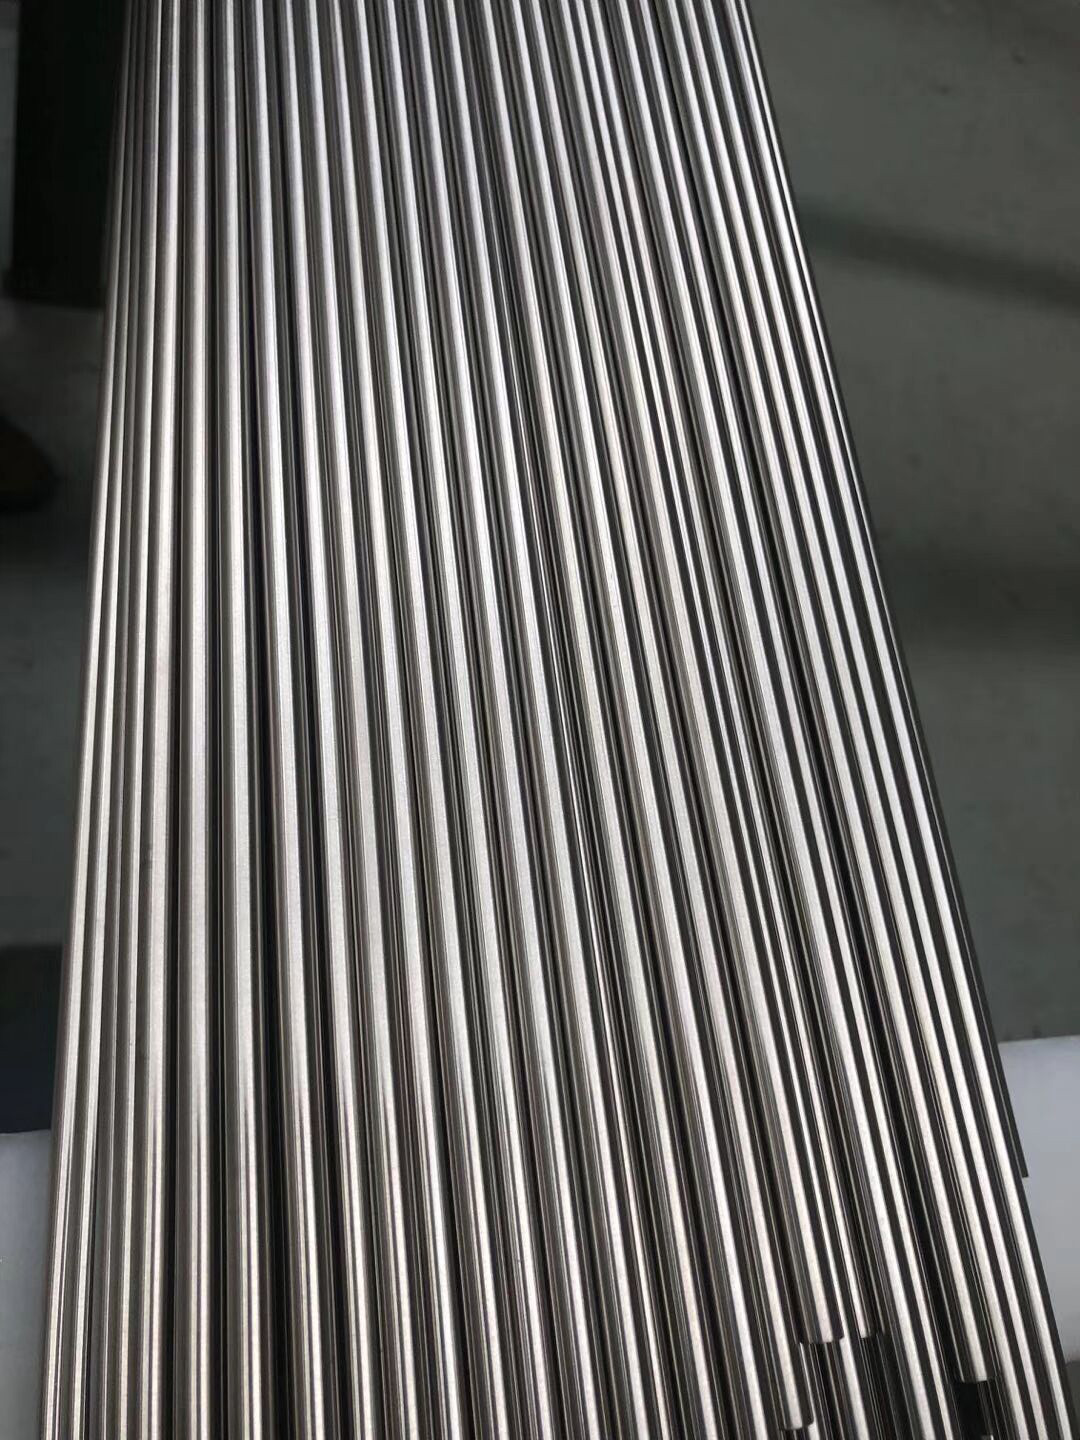 stainless steel tubing